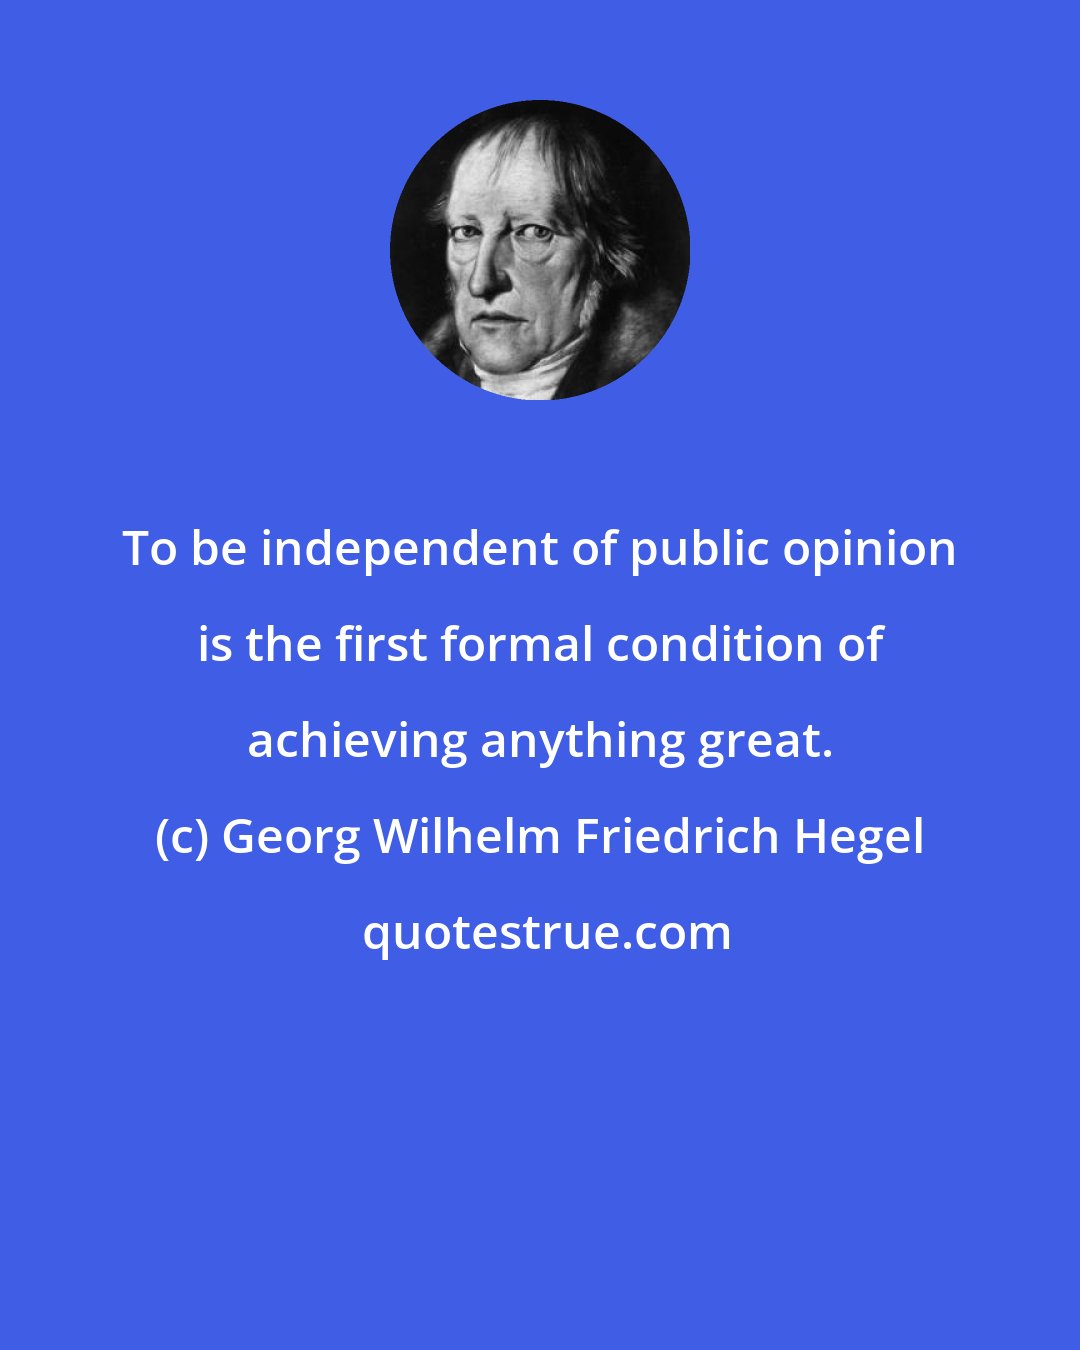 Georg Wilhelm Friedrich Hegel: To be independent of public opinion is the first formal condition of achieving anything great.